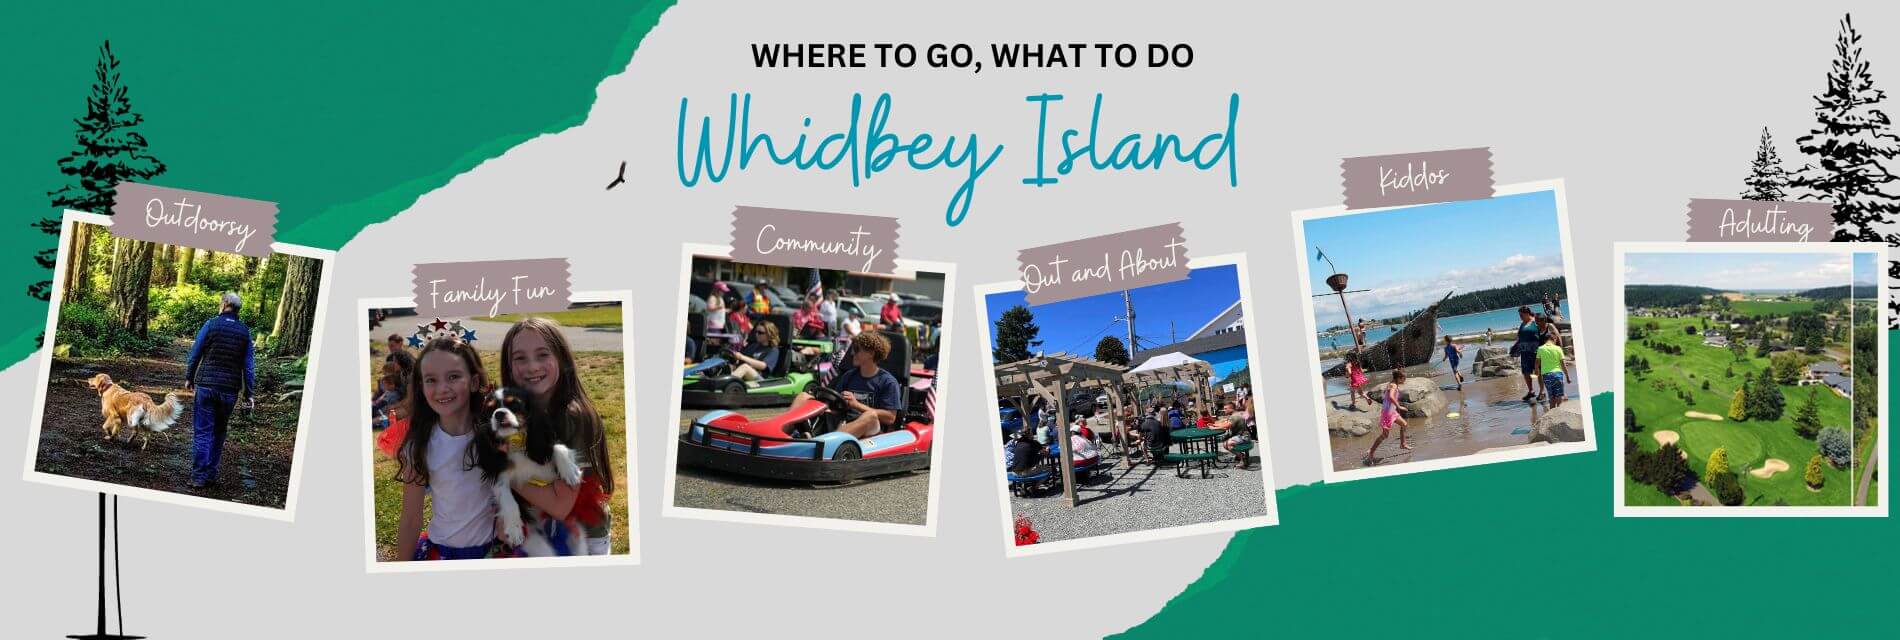 Where to go, What to do on Whidbey Island.